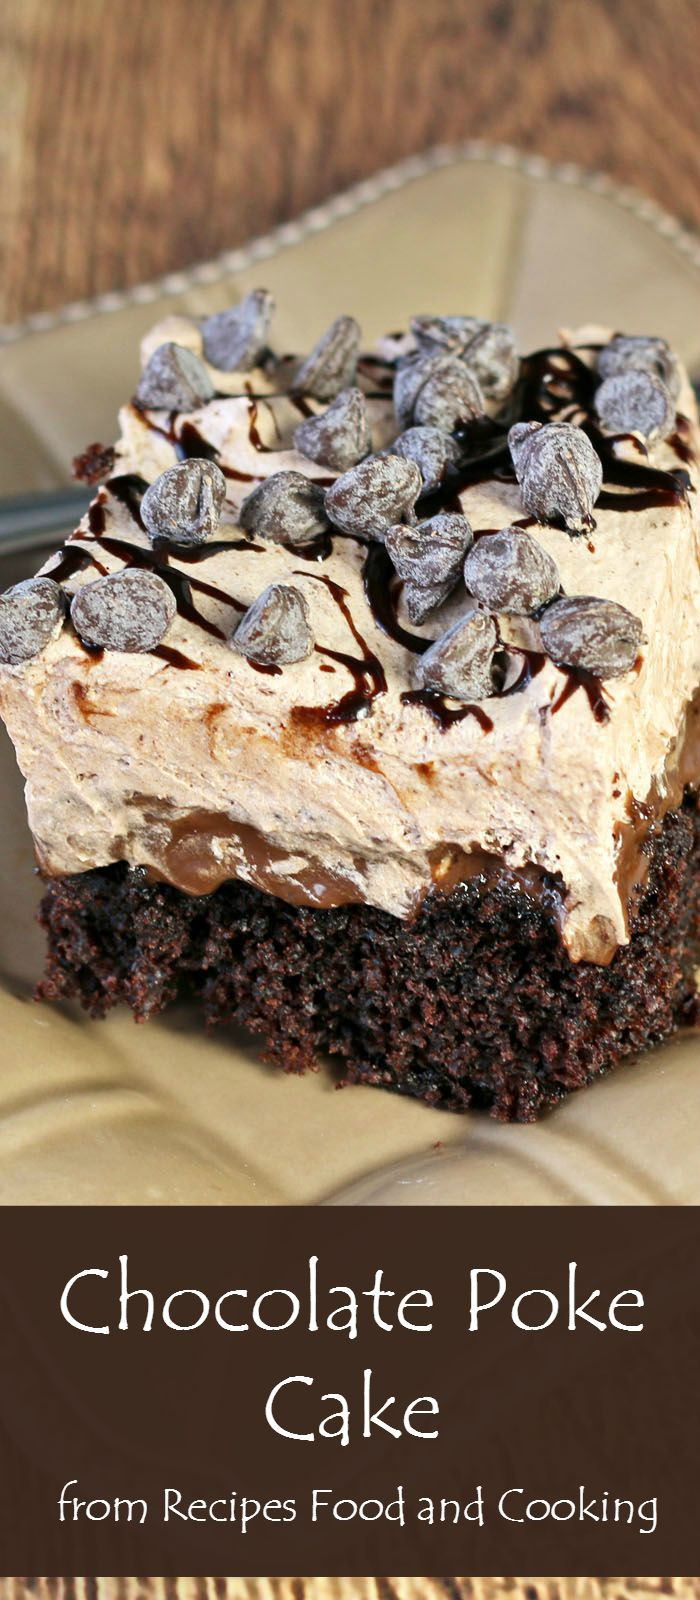 Chocolate Poke Cake
 Chocolate Poke Cake Choctoberfest Recipes Food and Cooking